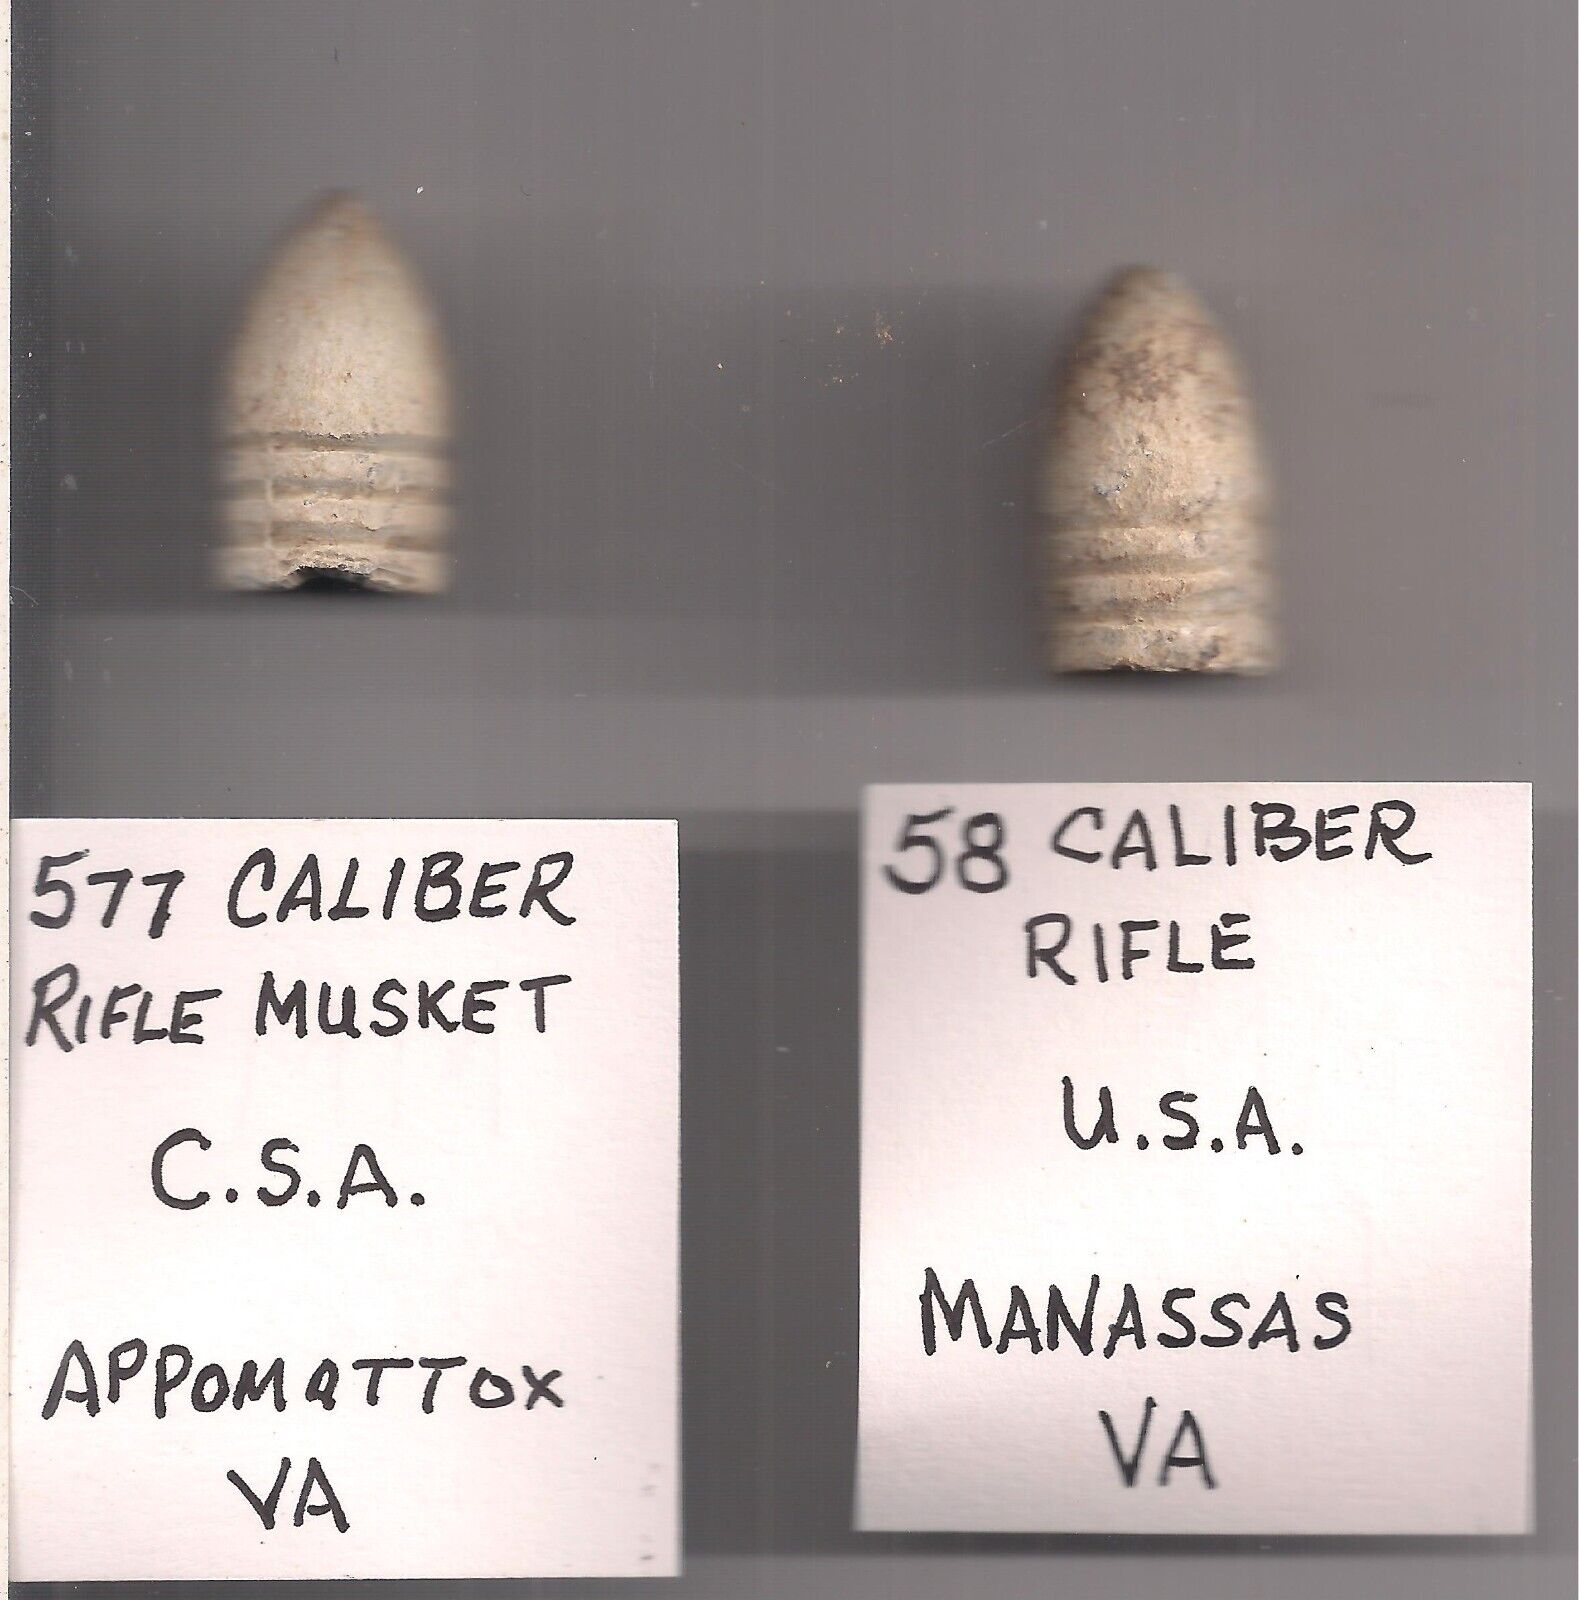 TWO GENUINE Civil War Bullets From Appomattox & Manassas. One from each side.